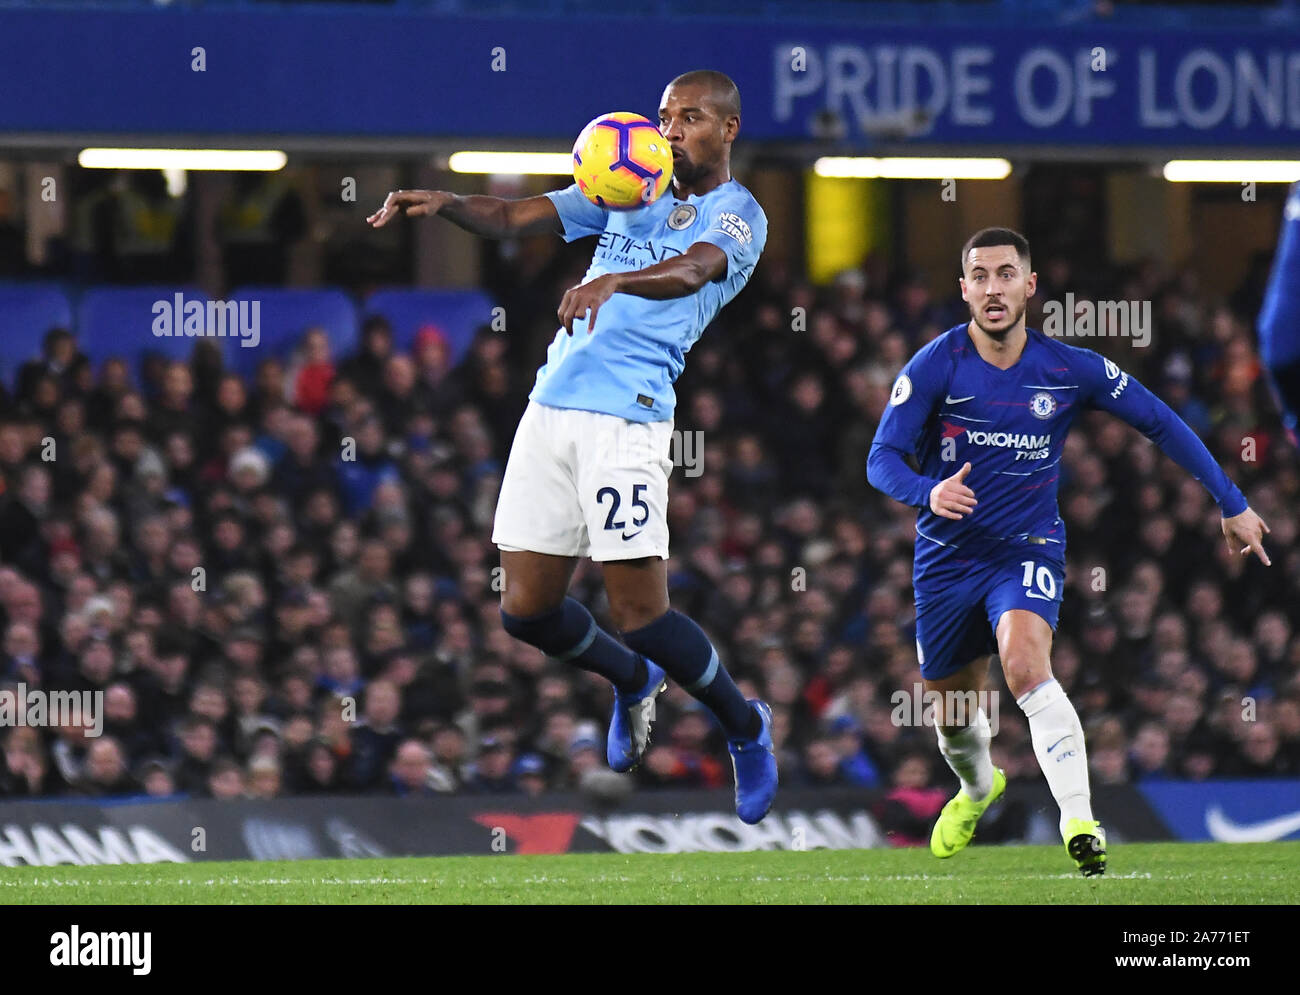 LONDON, ENGLAND - DECEMBER 8, 2018: pictured prior to the 2018/19 Premier League game between Chelsea FC and Manchester City at Stamford Bridge. Stock Photo